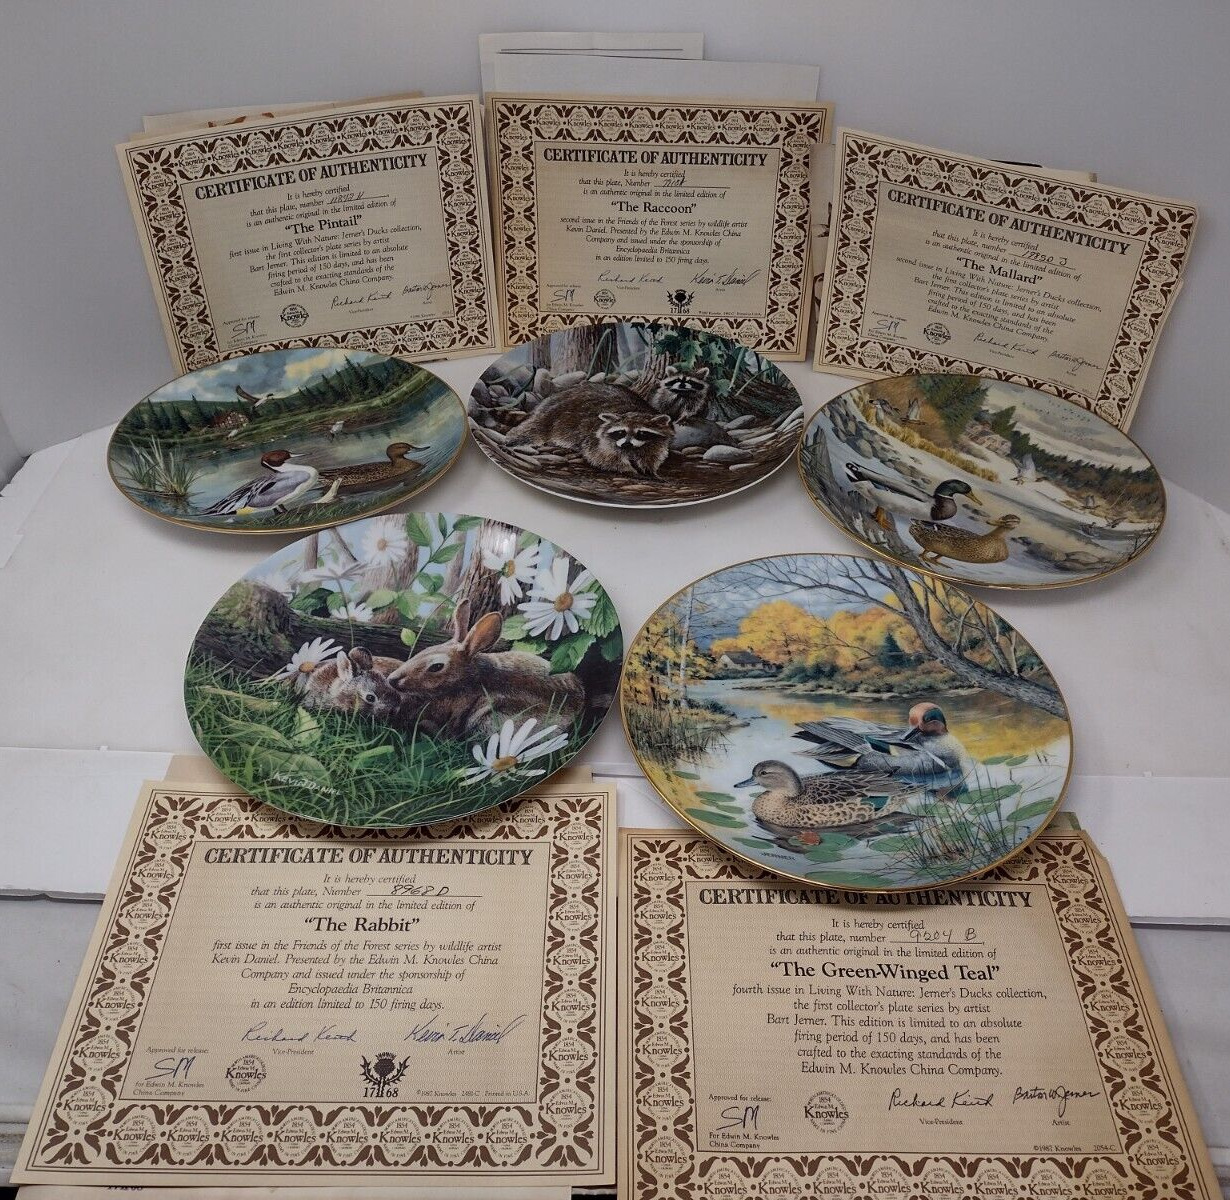 VINTAGE KEVIN DANIEL KNOWLES PLATE COLLECTION LOT X 5 COLLECTOR PLATES Cert Auth